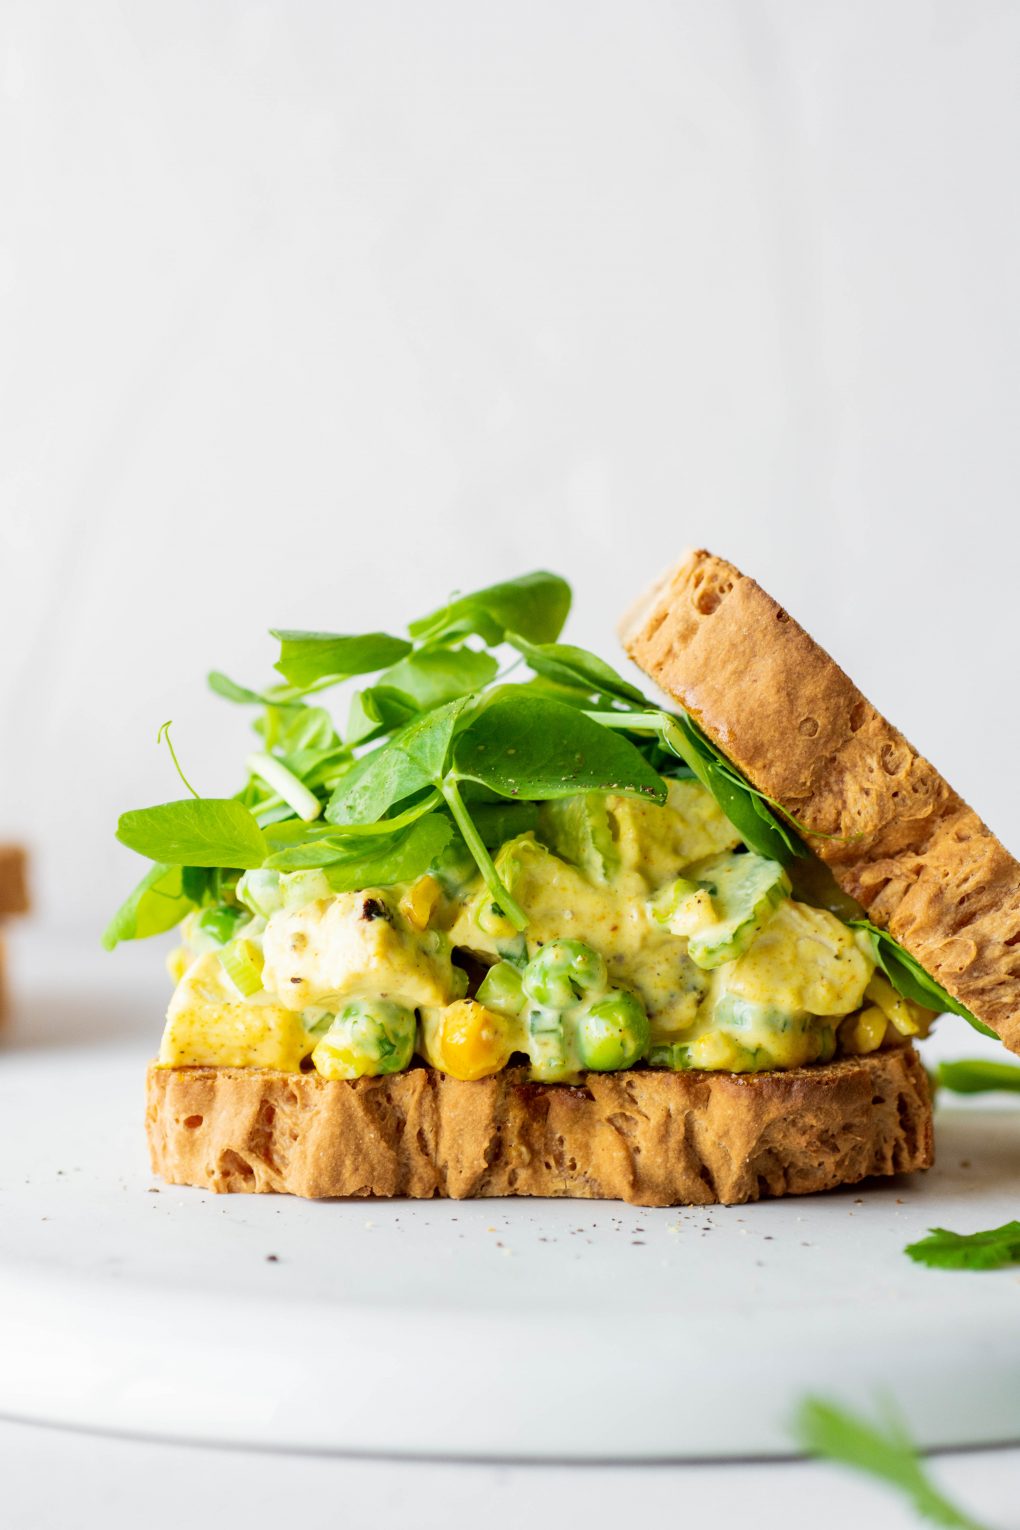 Side view of a curried chicken salad sandwich with some fresh greens and the top piece of bread angled off to the side. On a white background.